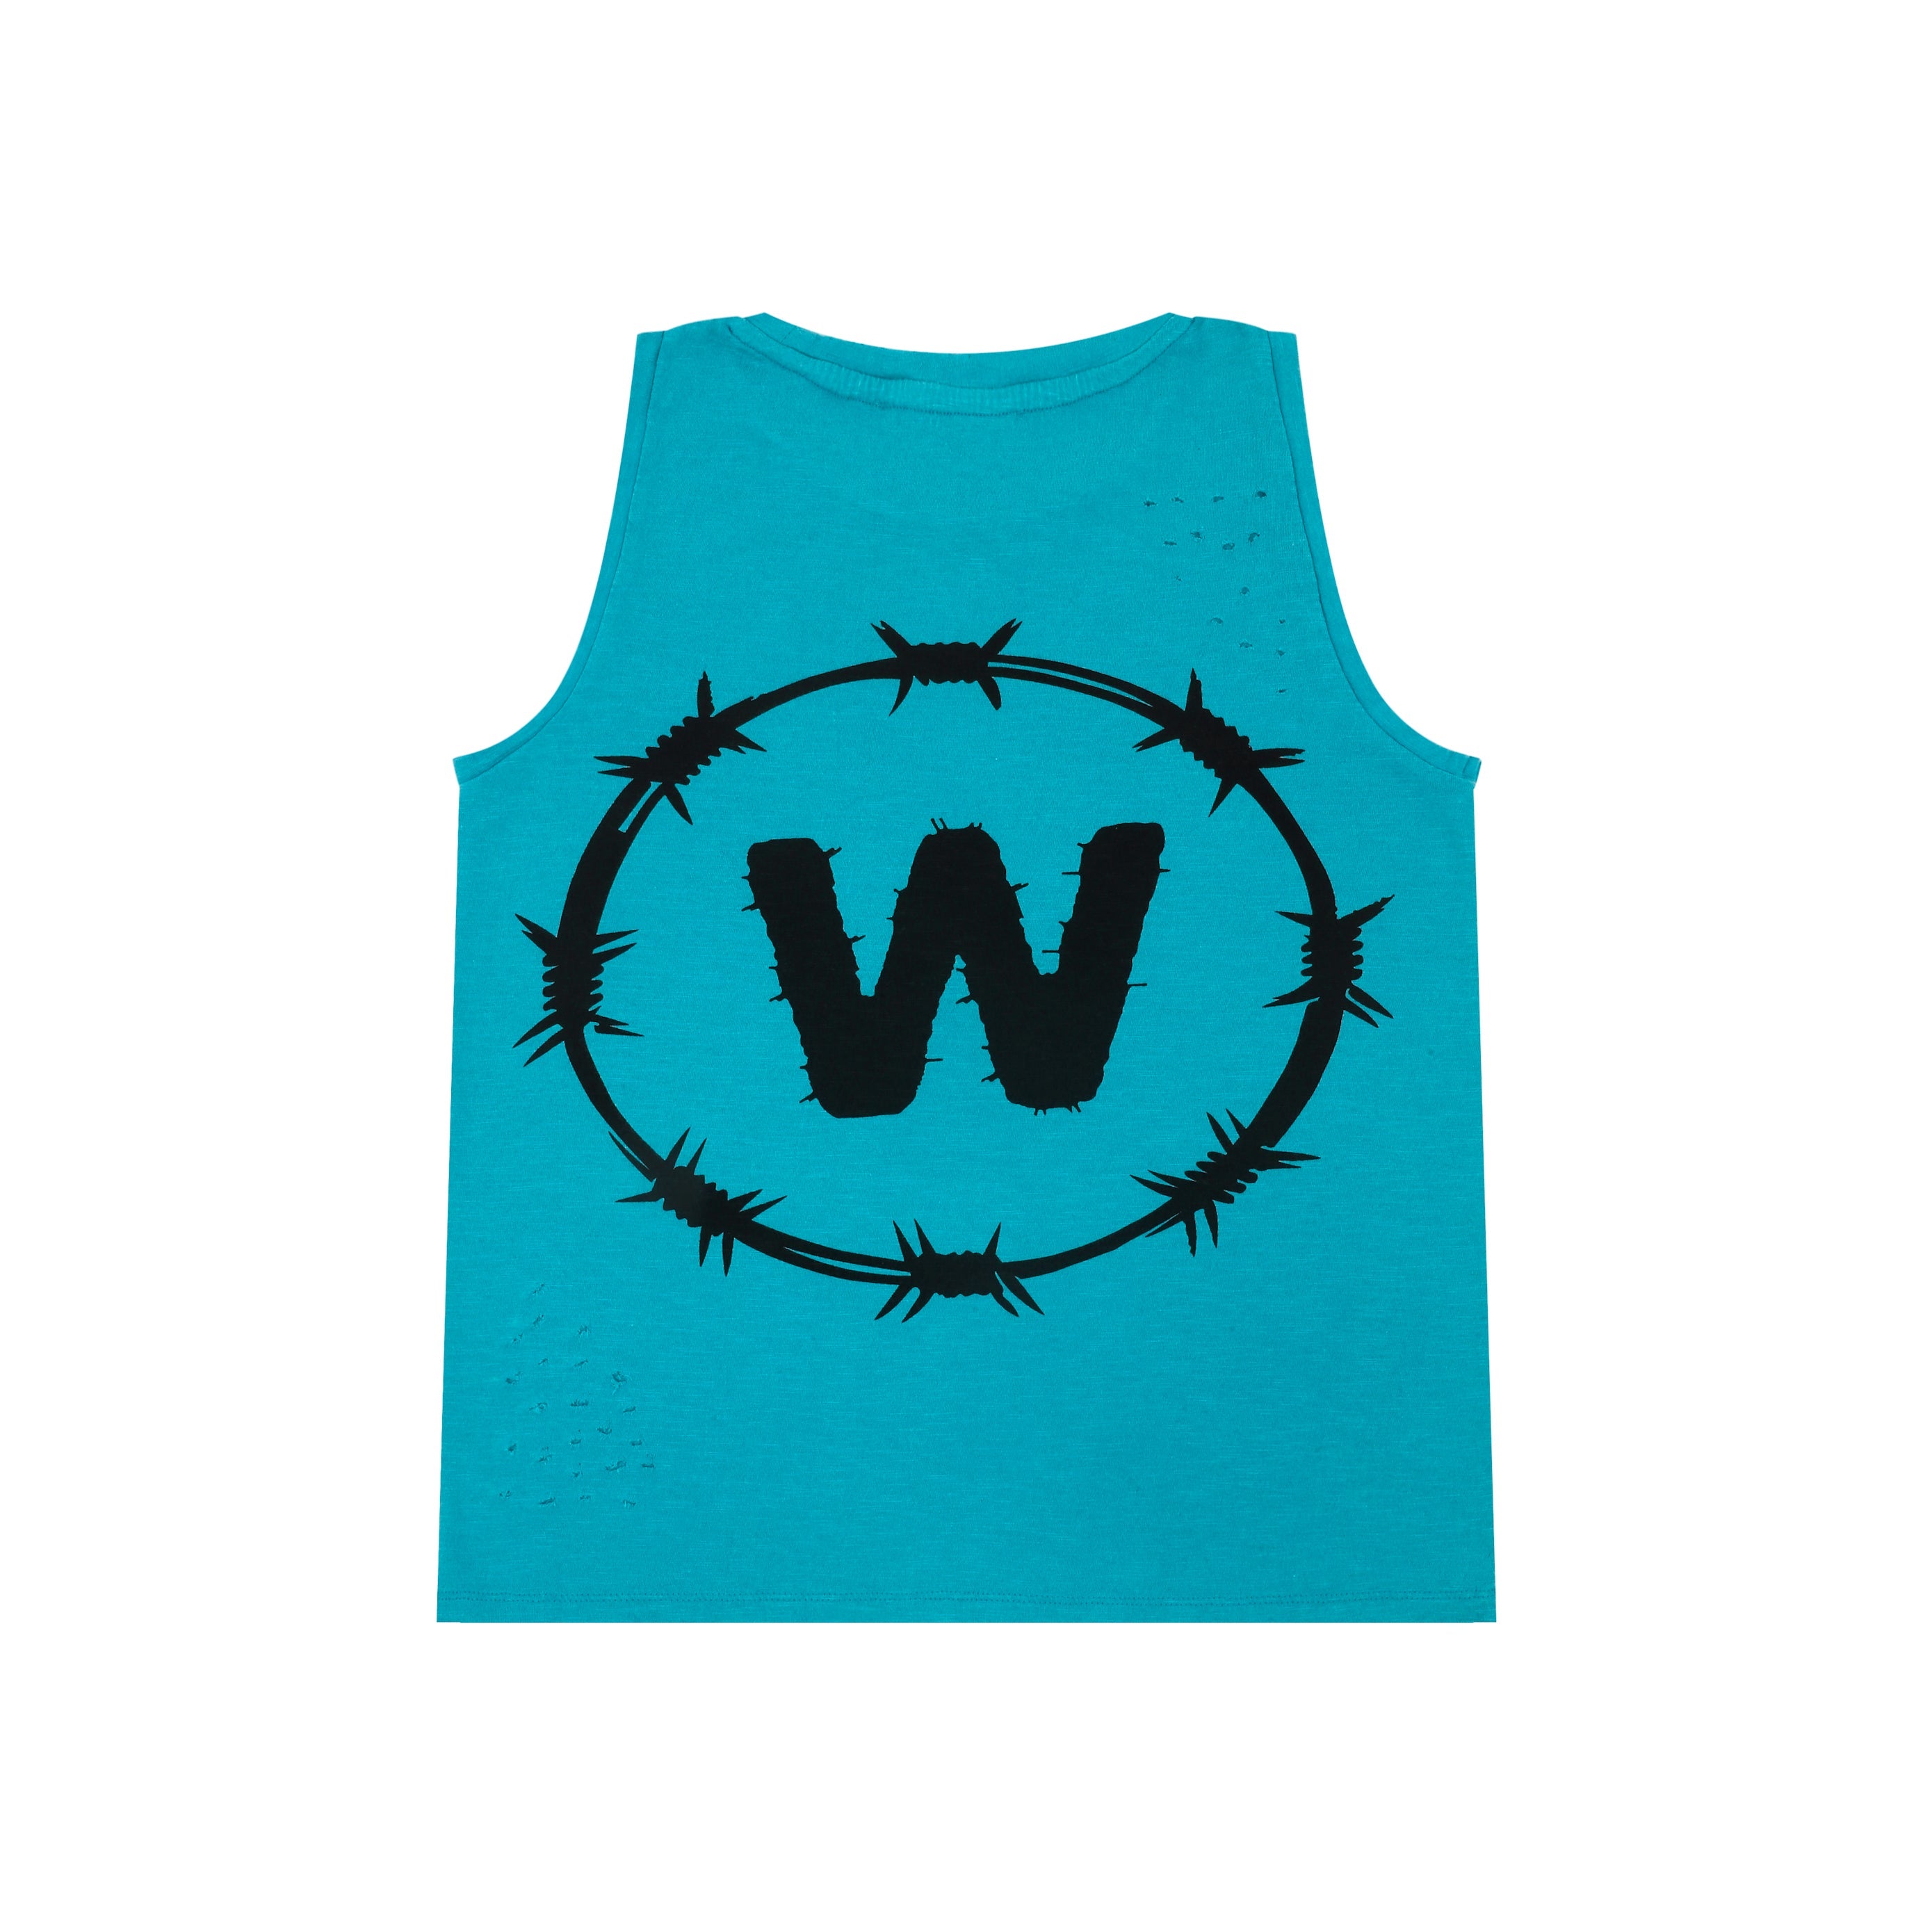 Mineral - Round Neck Tank Top "Gone With The Wind"